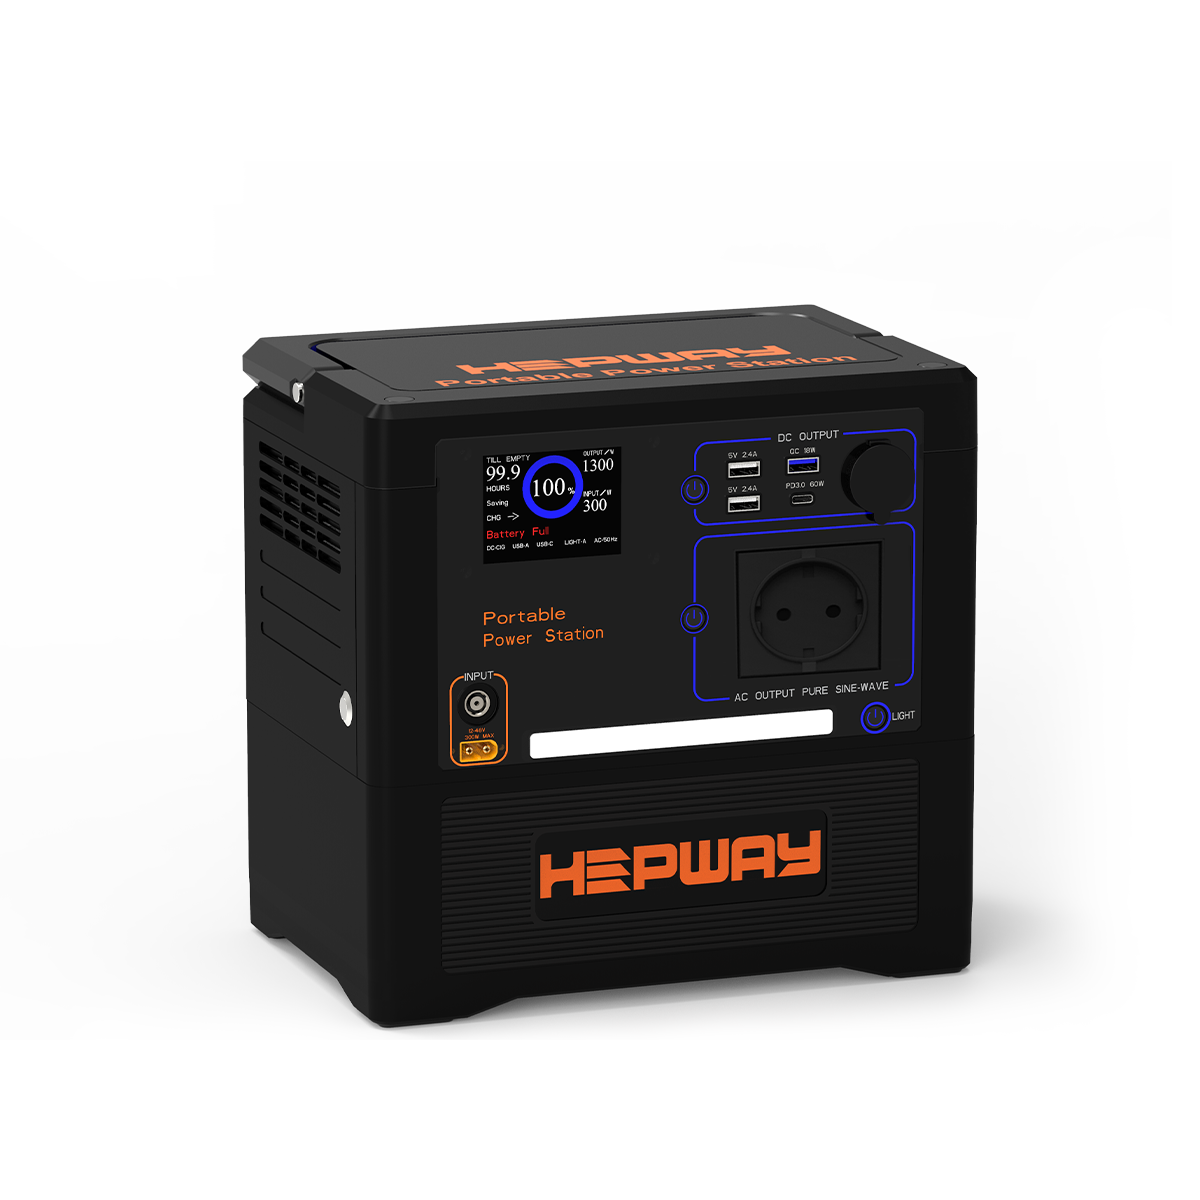 HEPWAY Euler P1300 1300W Portable Power Station